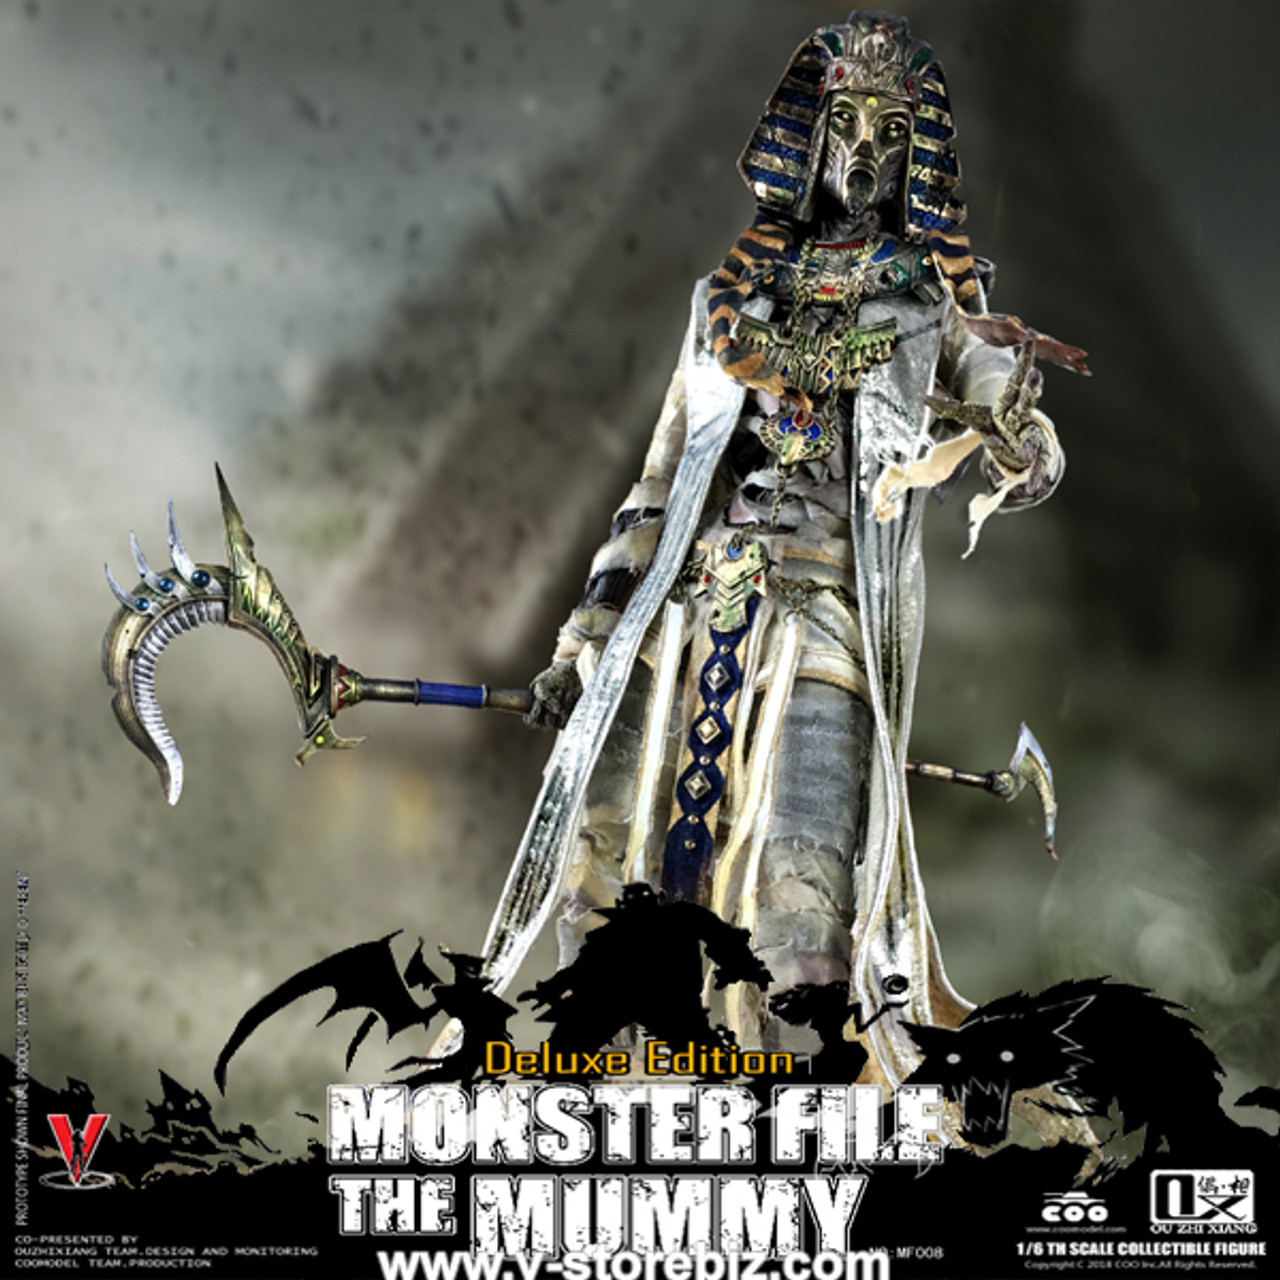 Coomodel x Ouzhixiang MF009 Monster File Series - Mummy (Deluxe 